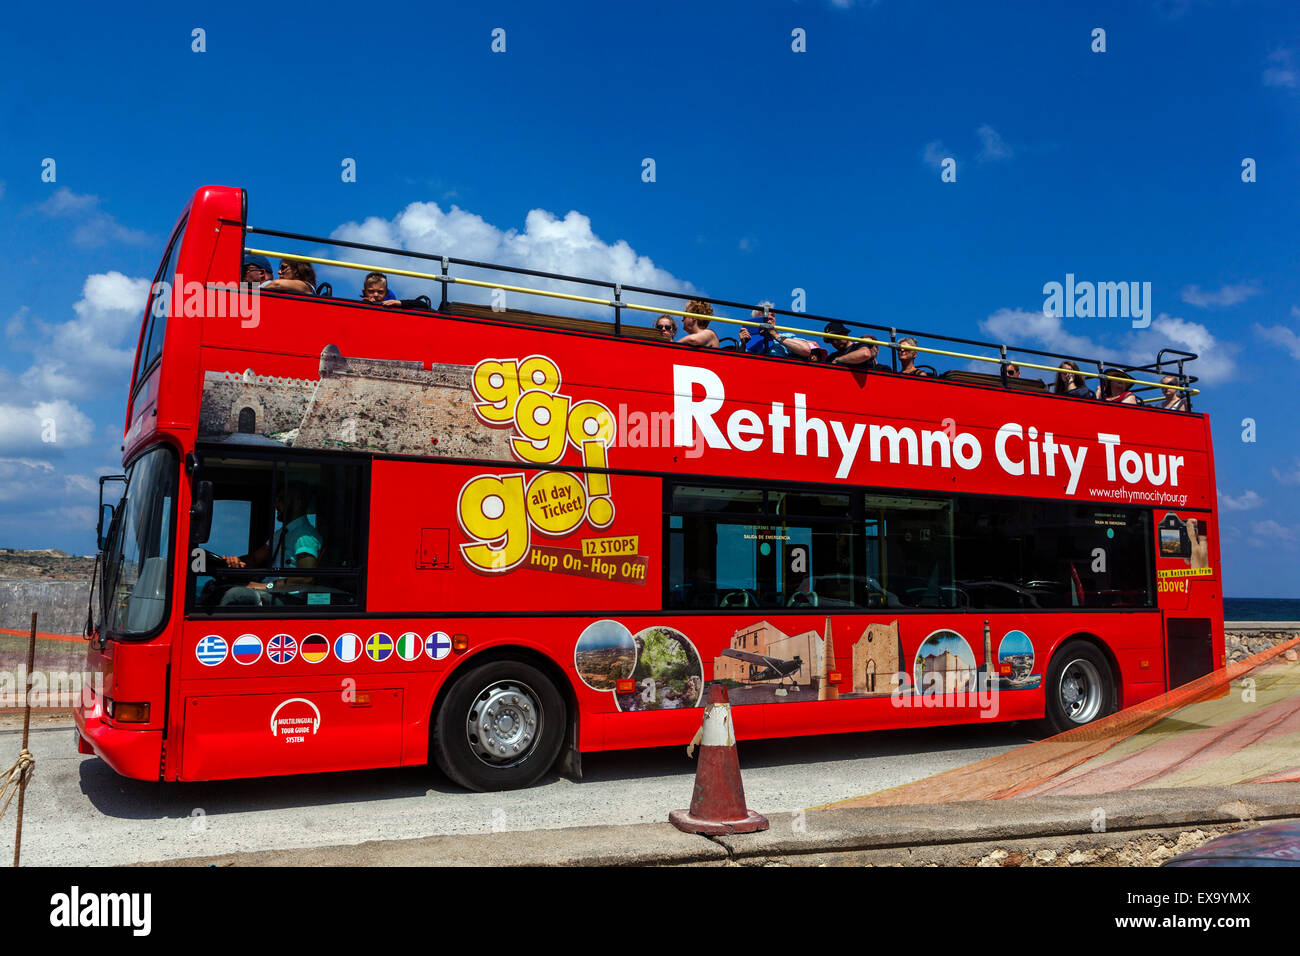 Rethymno Crete Greece, People in Double-decker City tour bus sightseeing bus, Stock Photo